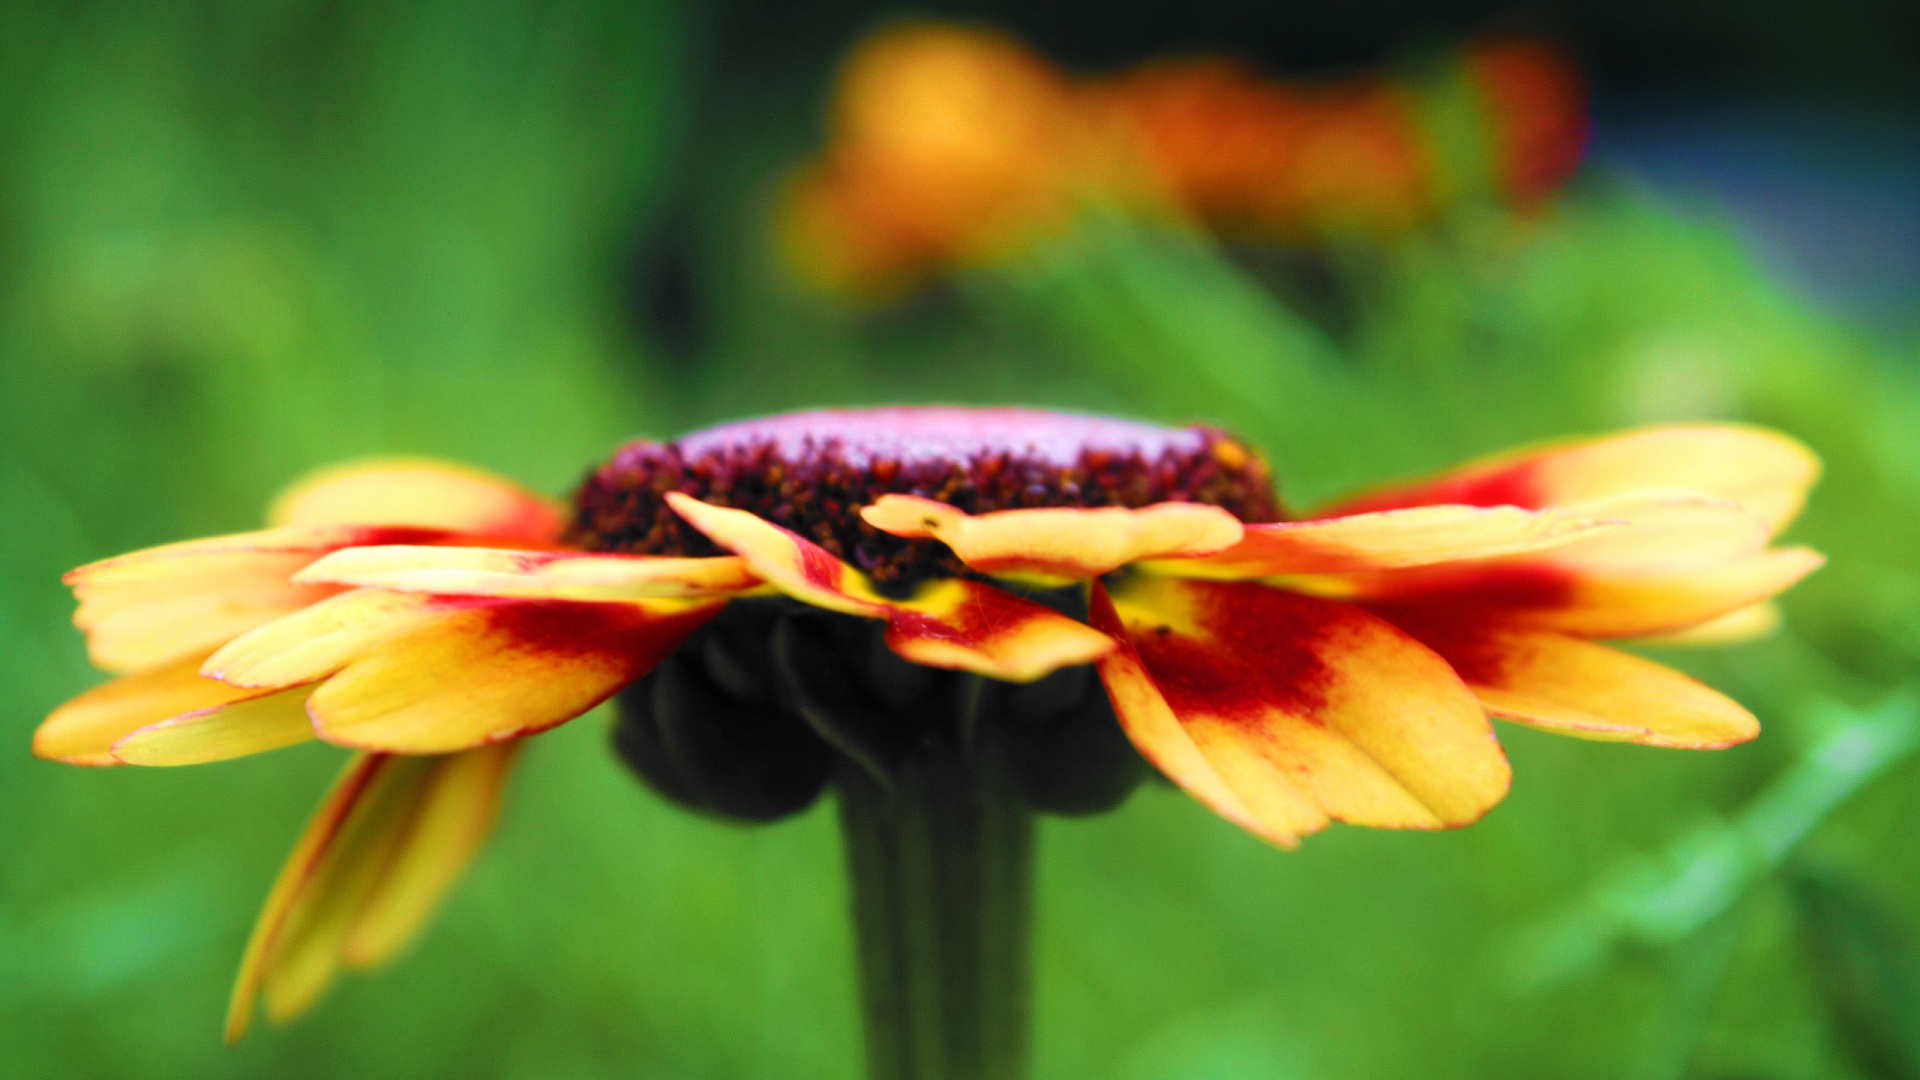 Yellow and Red Flower in Tilt Shift Lens. Wallpaper in 1920x1080 Resolution